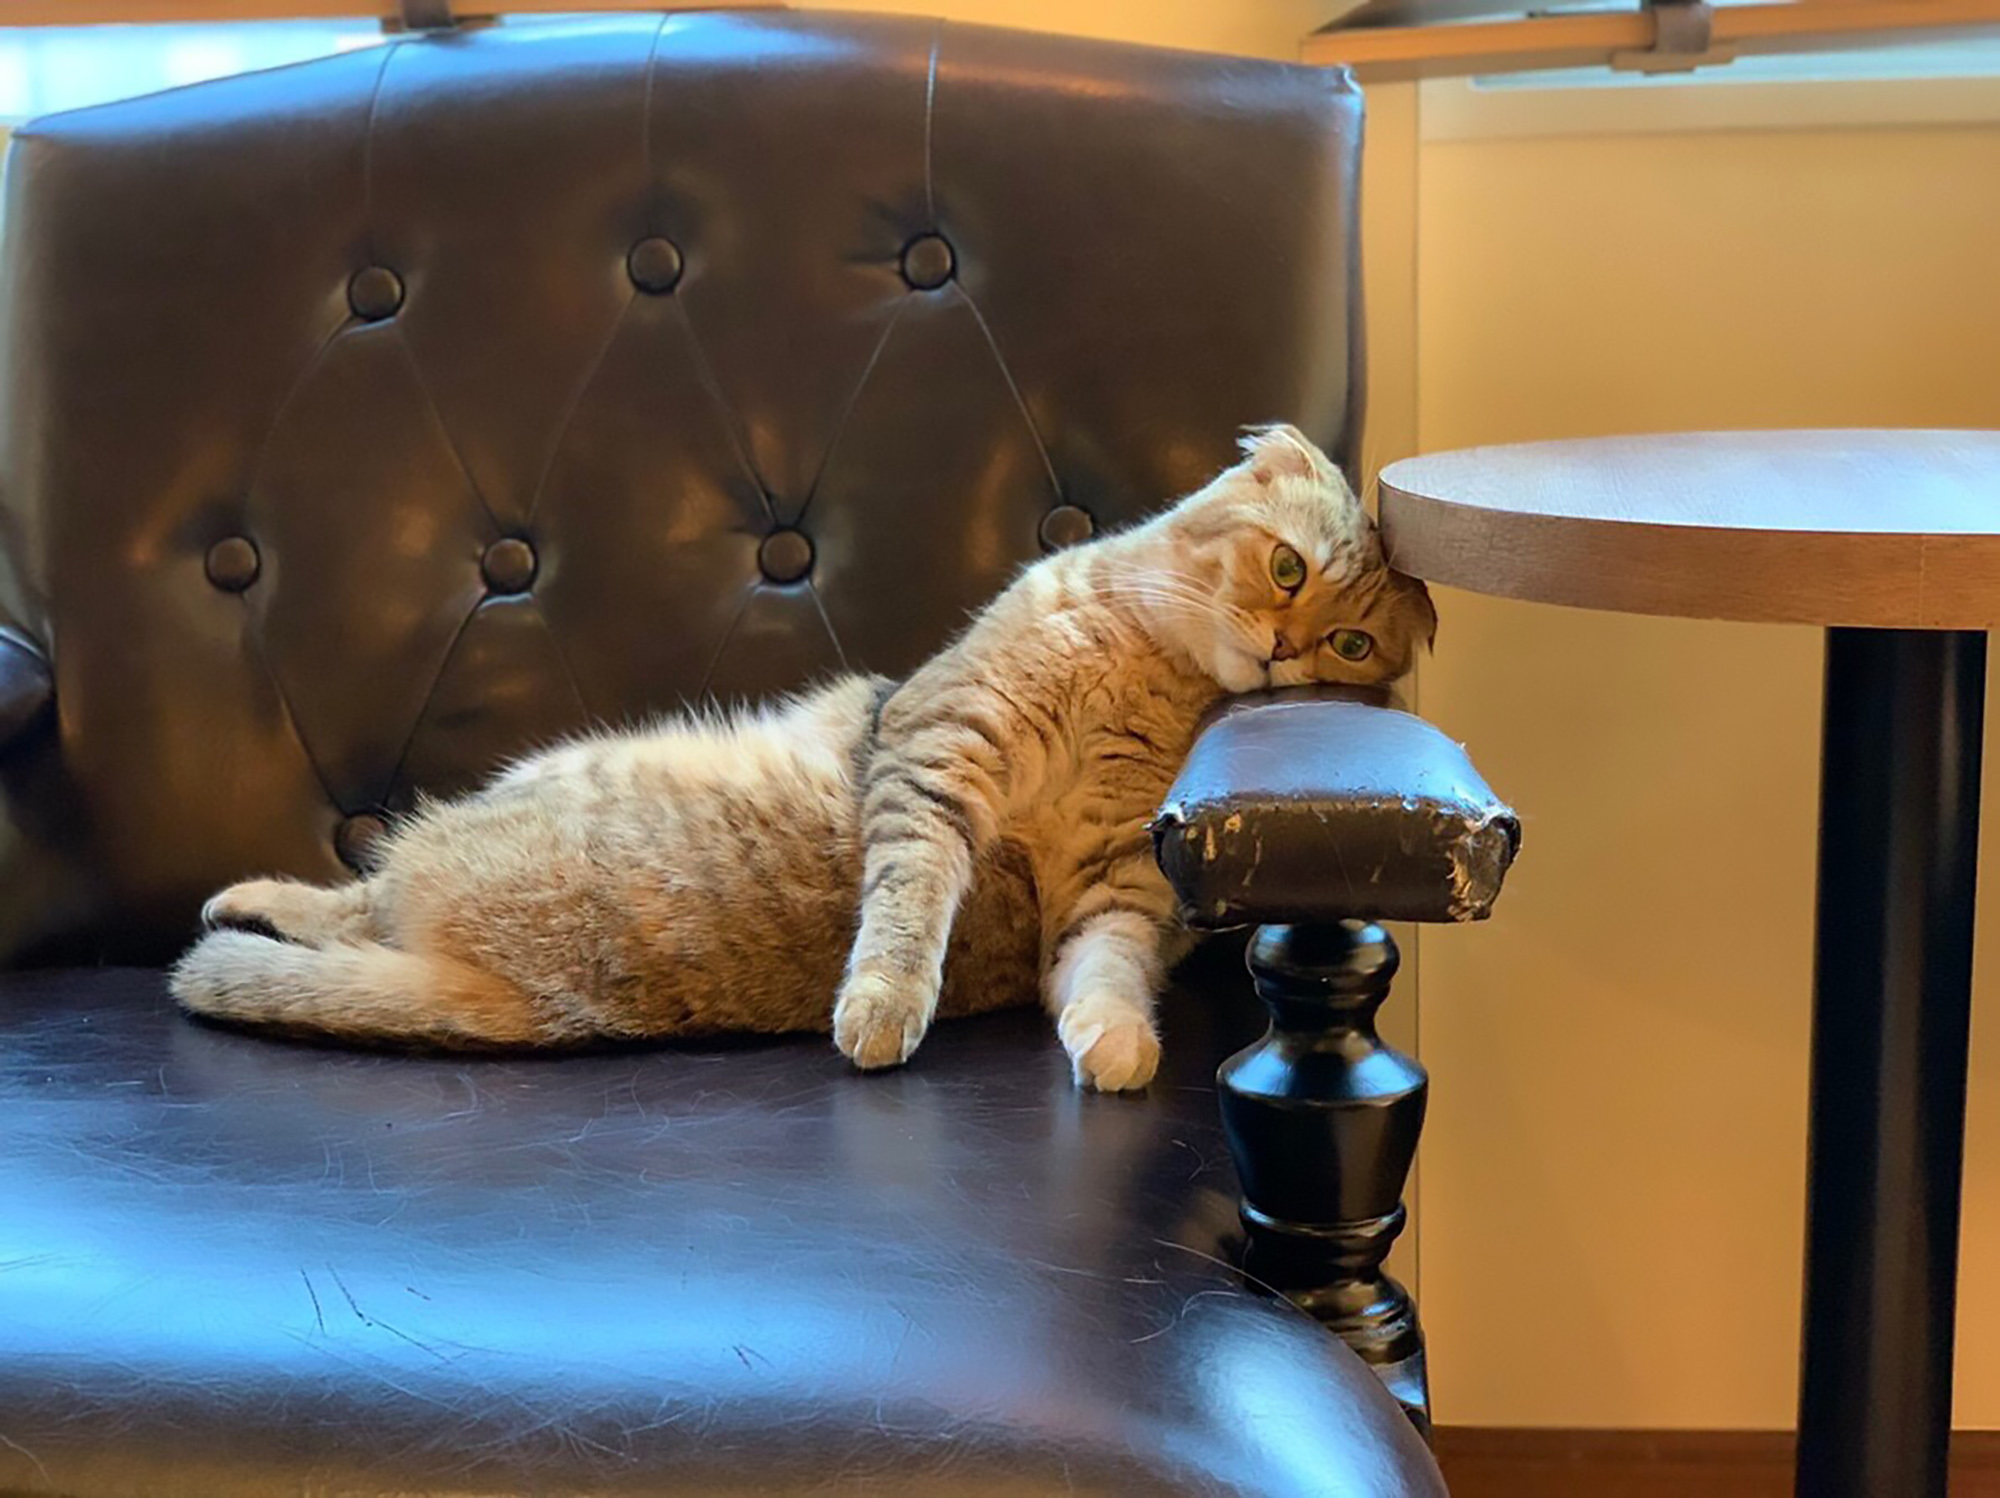 Read more about the article Depressed Cat Cafe Moggie Causes Heated Debate